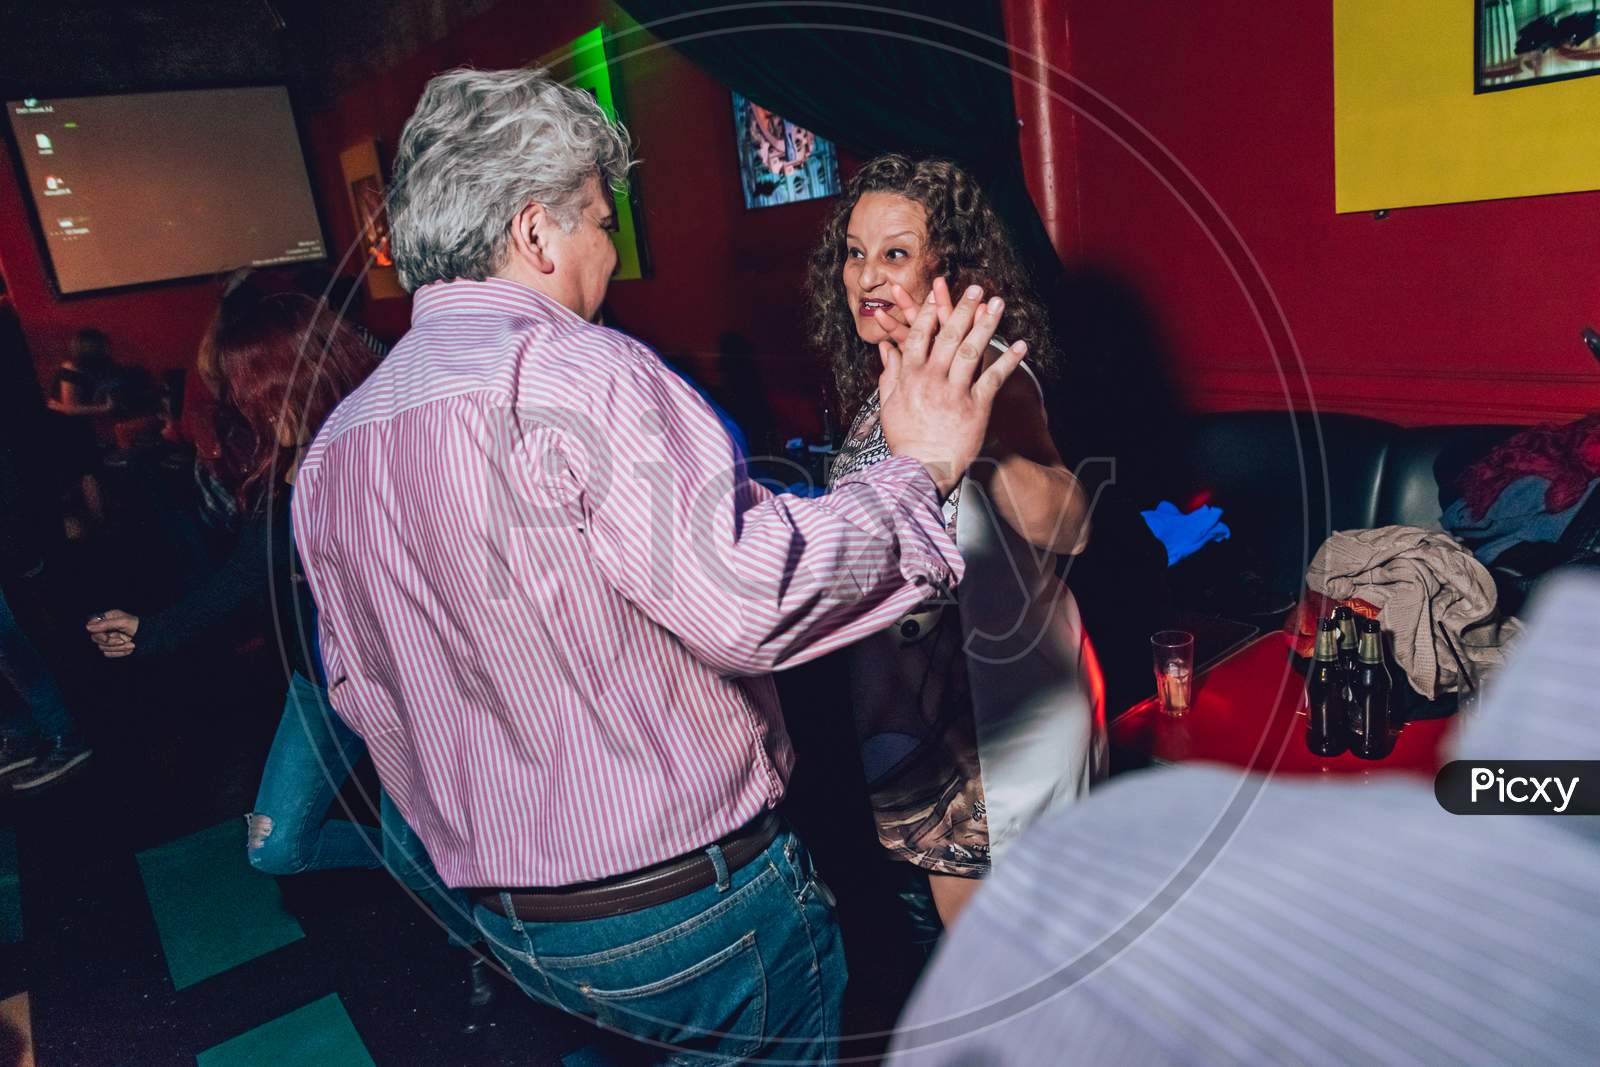 Adults Dancing In A Party.